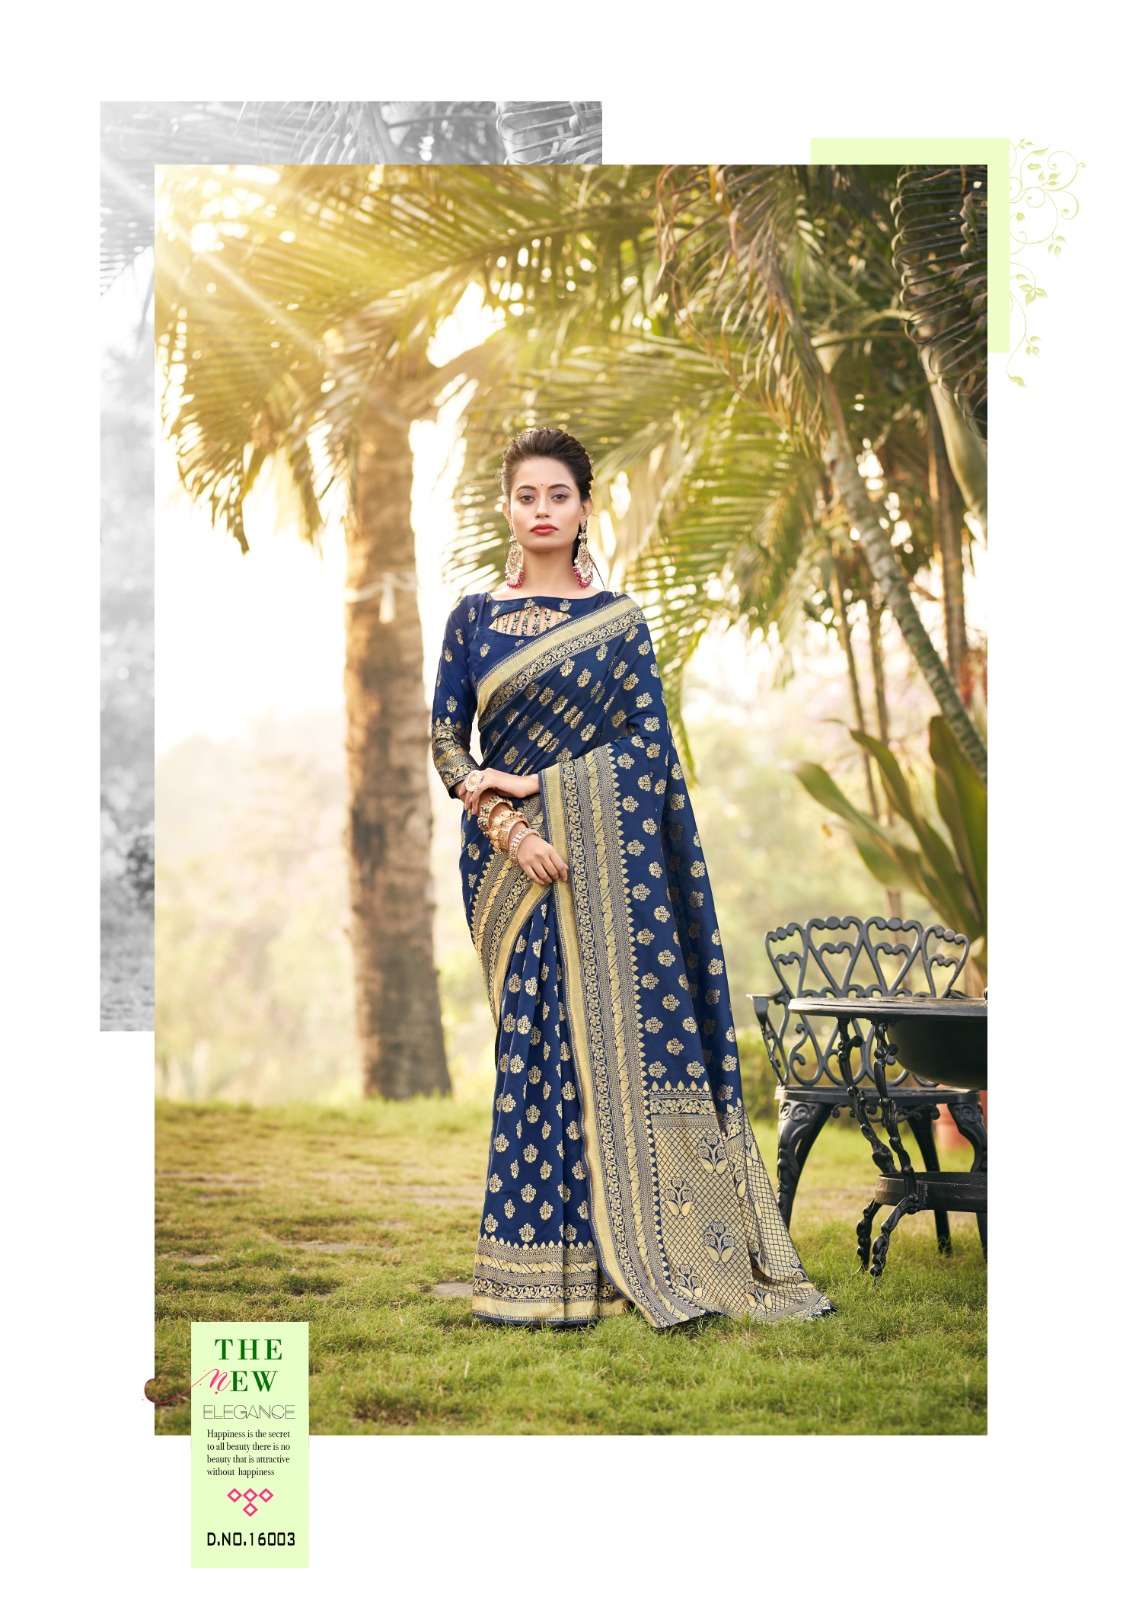 Shaz By The Fabrica 16001 To 16006 Series Indian Traditional Wear Collection Beautiful Stylish Fancy Colorful Party Wear & Occasional Wear Handloom Silk Sarees At Wholesale Price